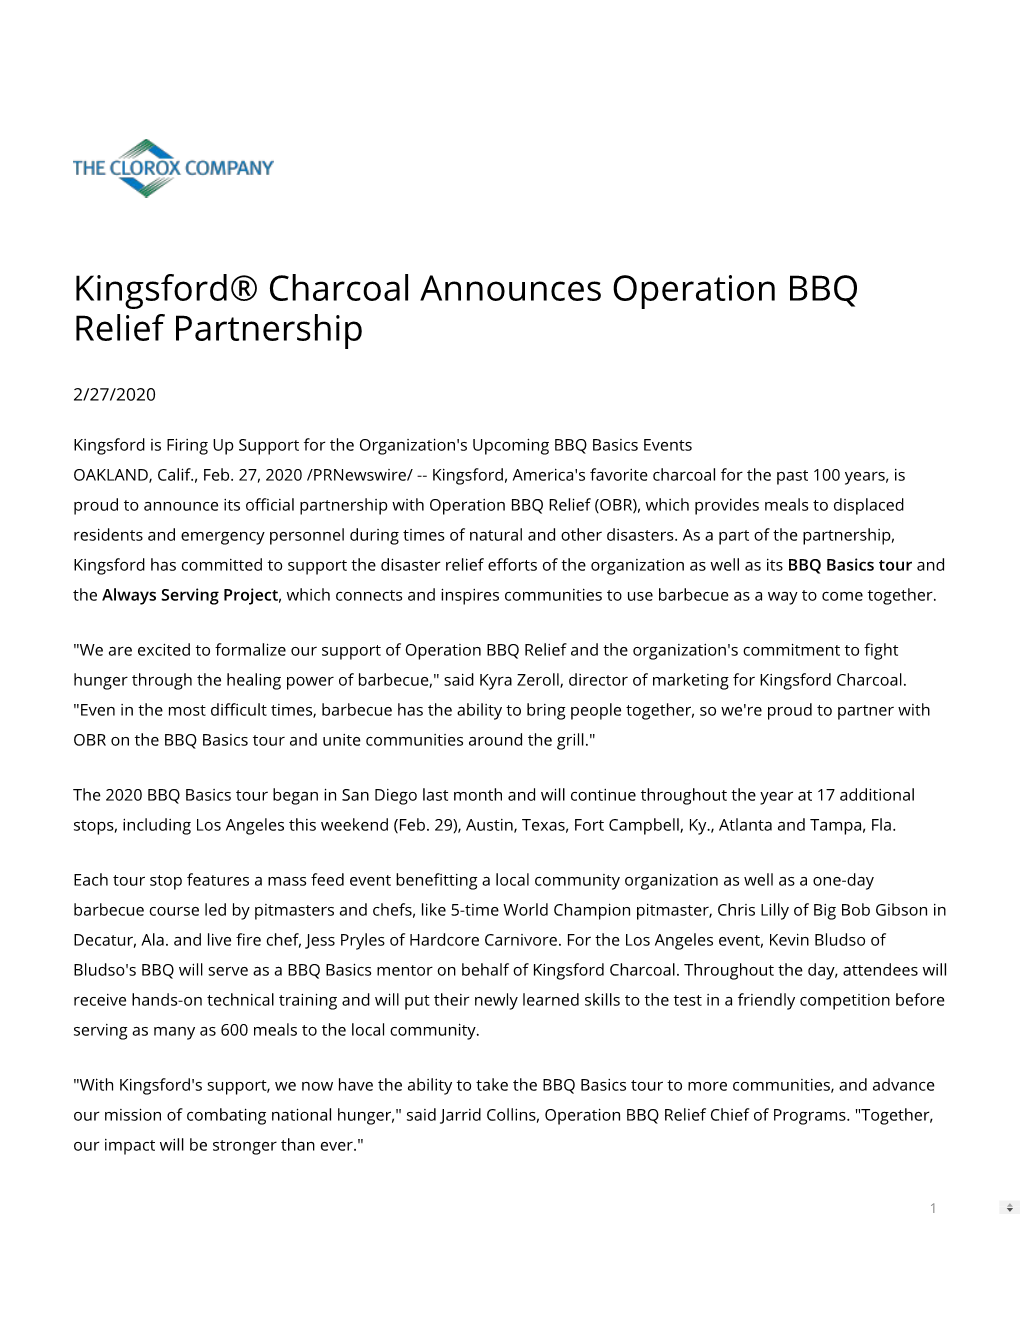 Kingsford® Charcoal Announces Operation BBQ Relief Partnership